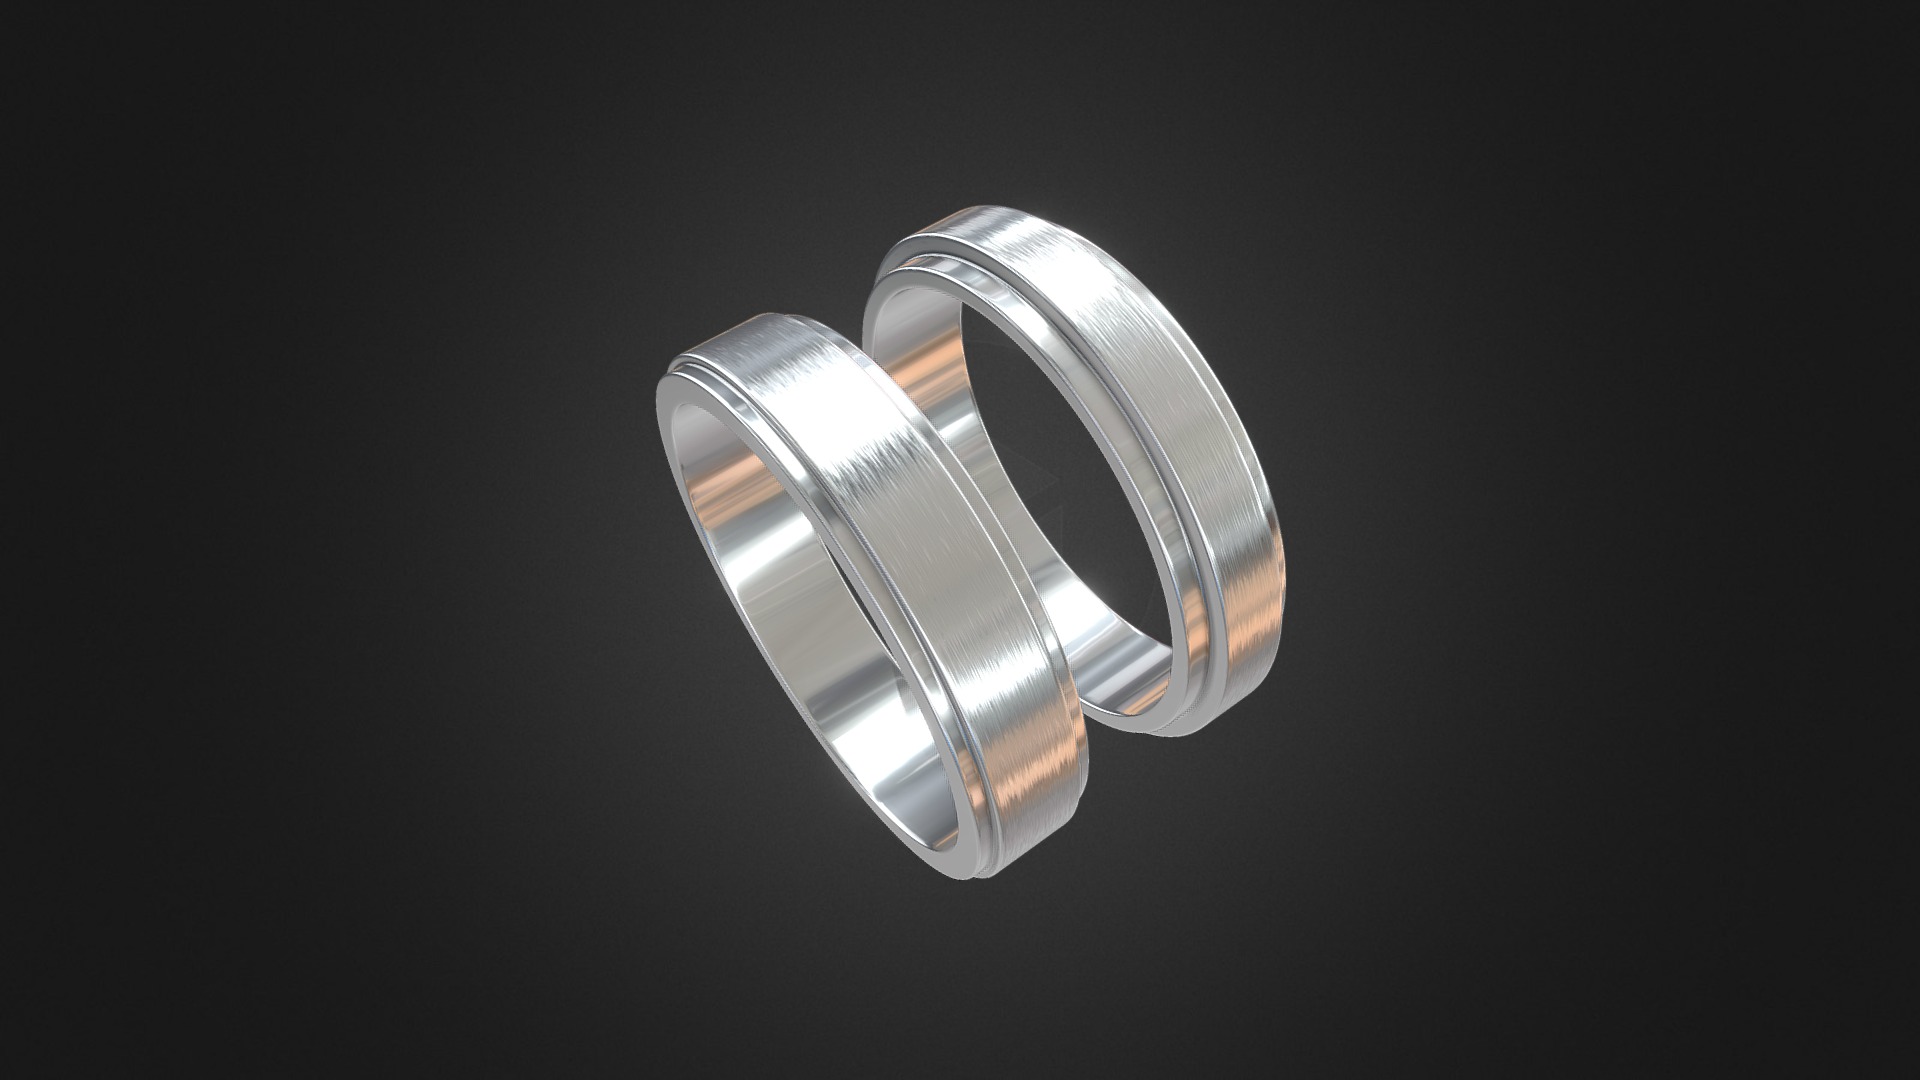 3D model 1016 – Ring - This is a 3D model of the 1016 - Ring. The 3D model is about a silver and gold ring.